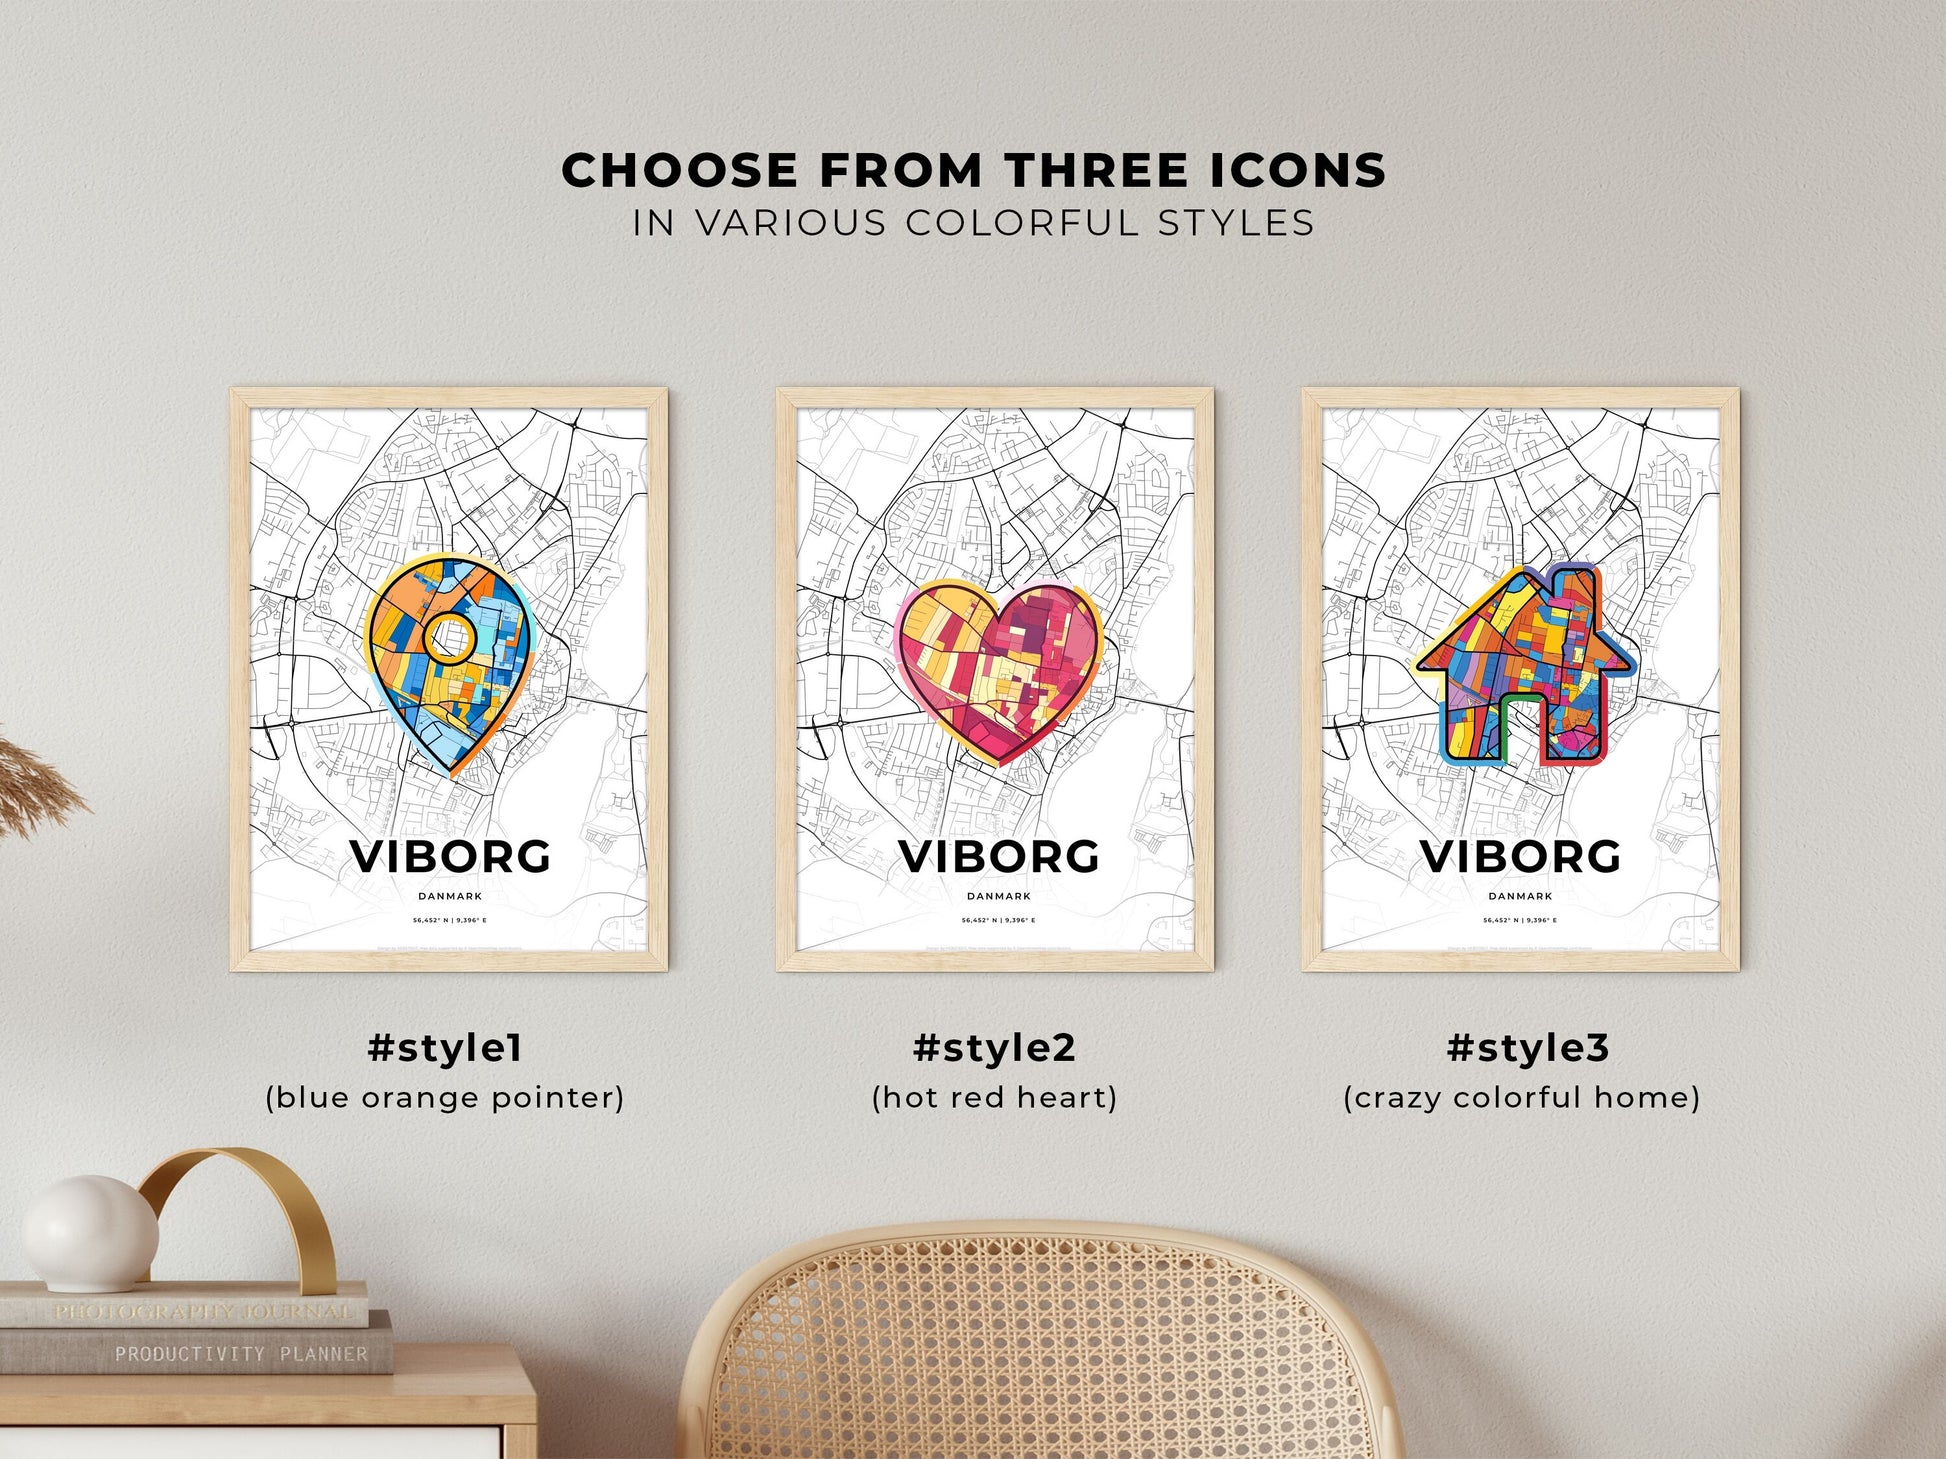 VIBORG DENMARK minimal art map with a colorful icon. Where it all began, Couple map gift.